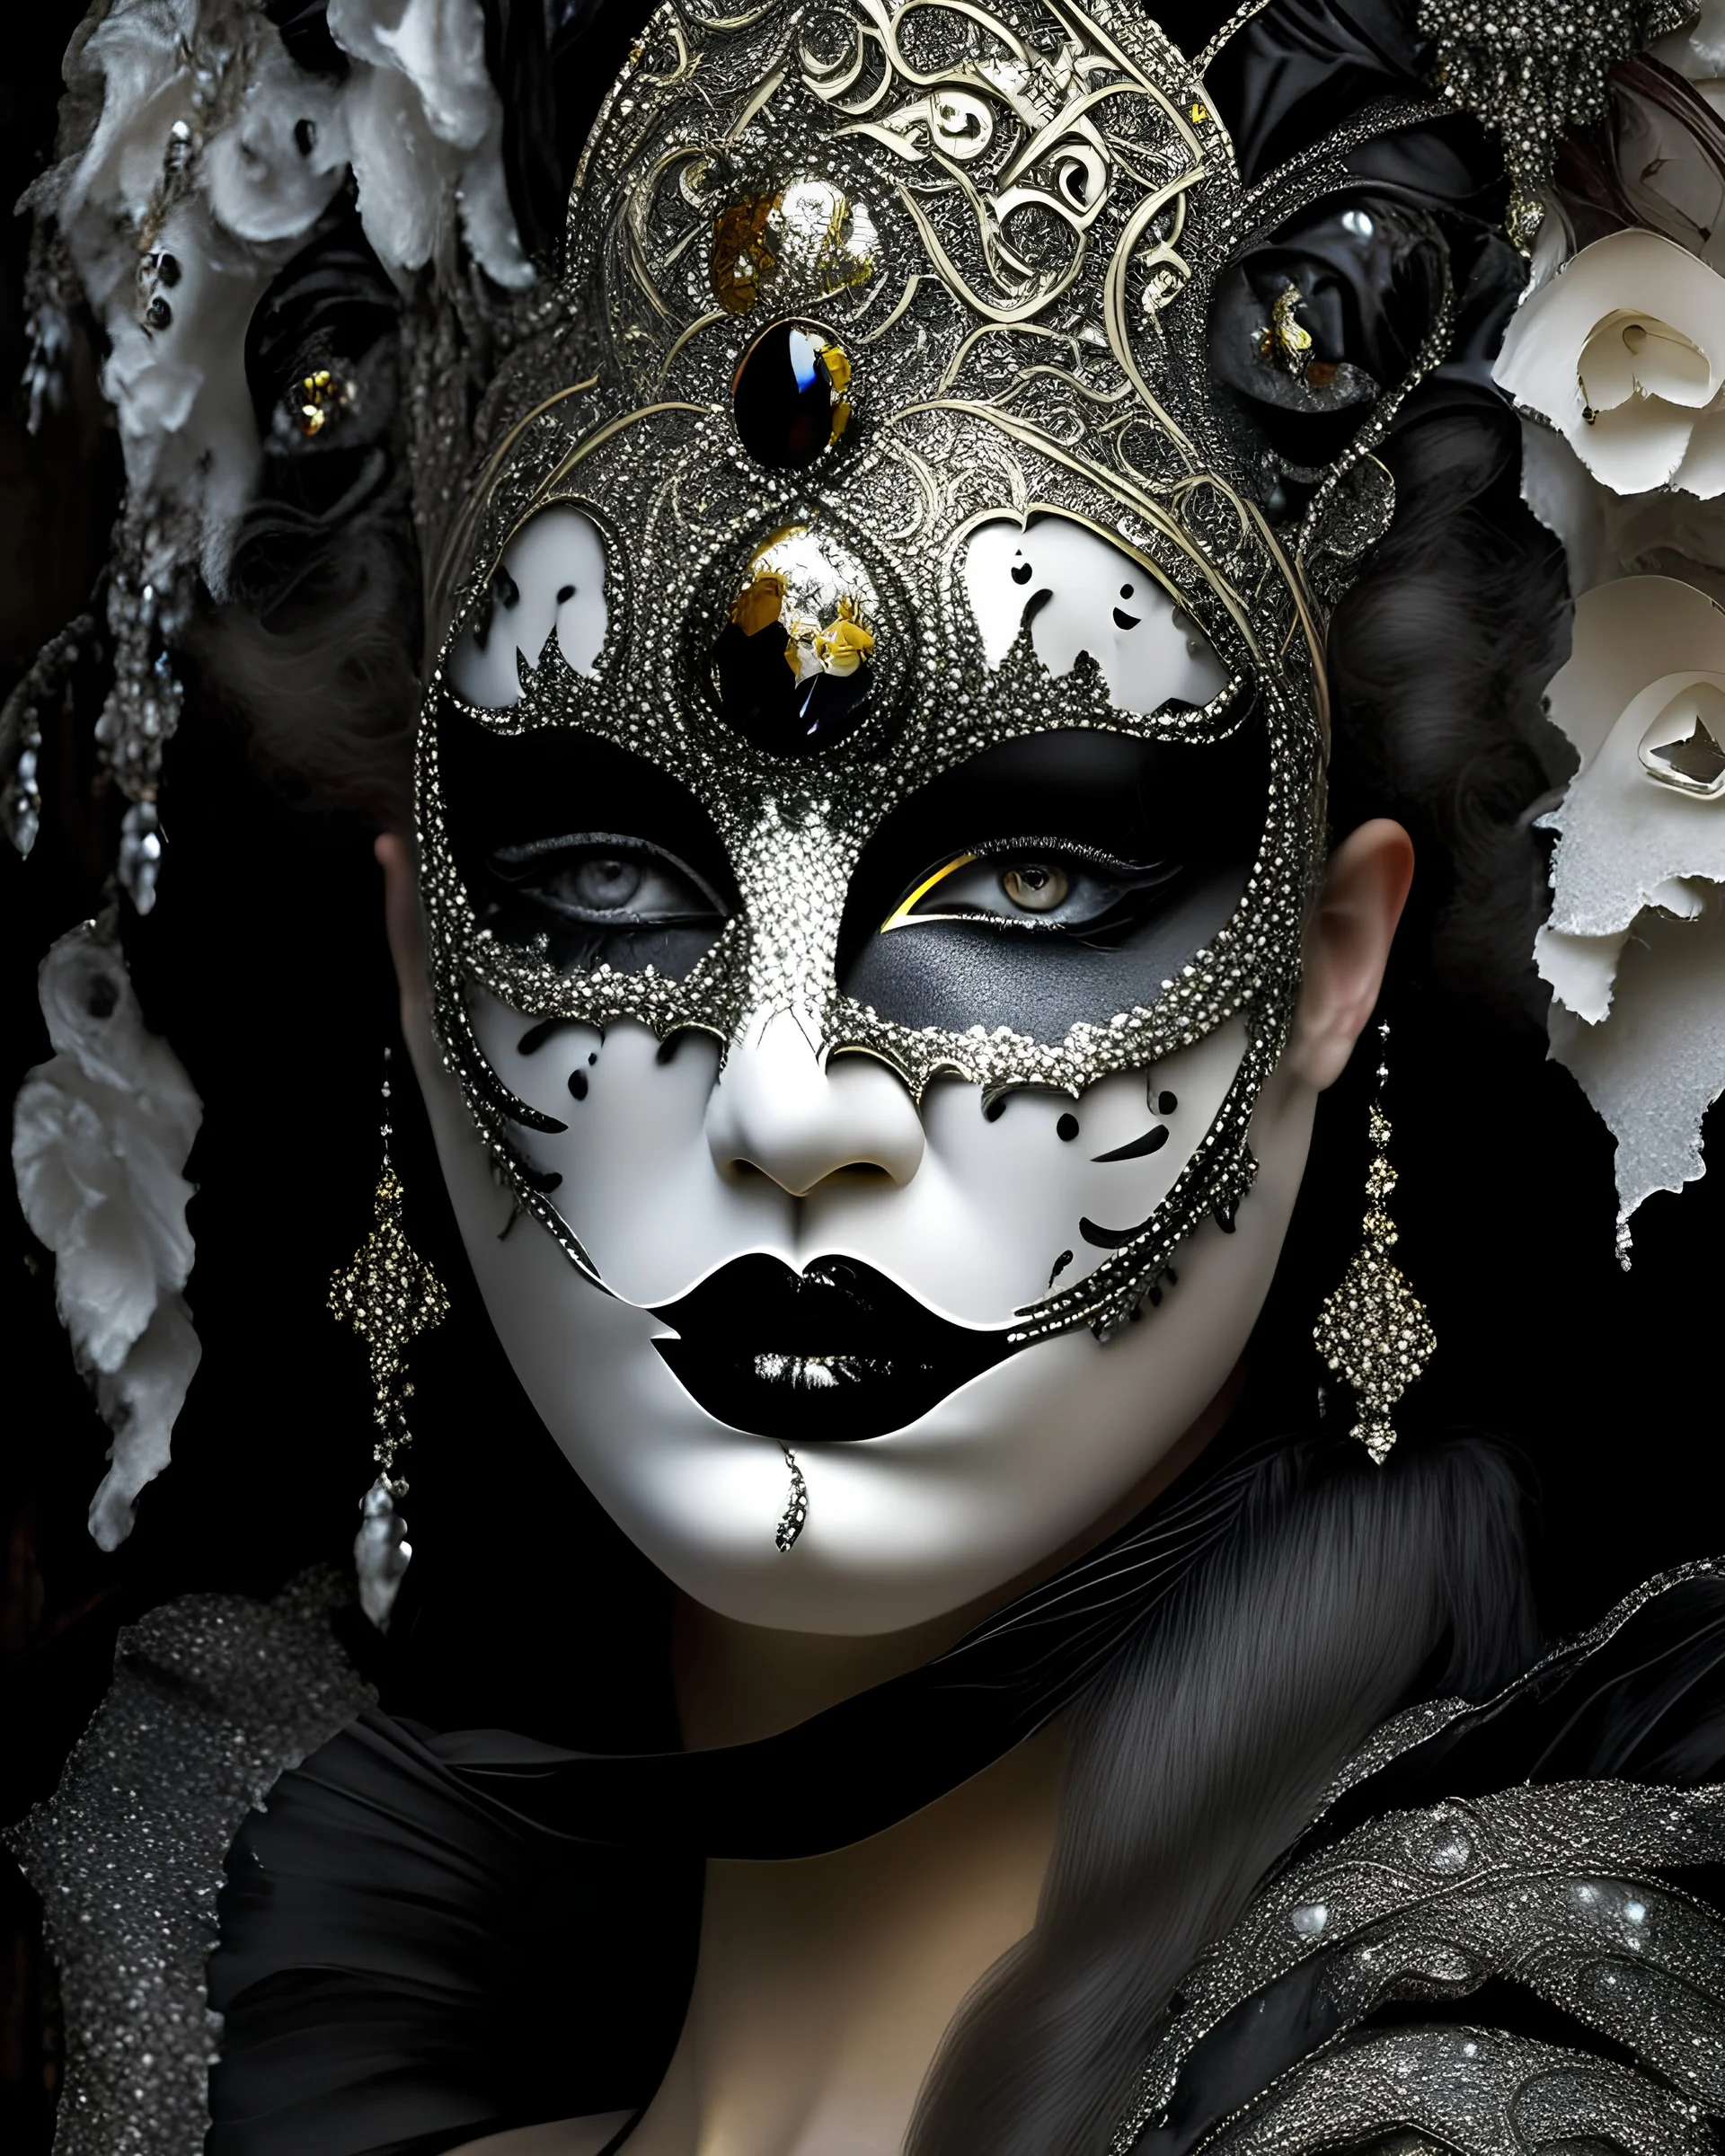 Beautiful woman portrait adorned with át nouveau palimpsest carnival of venice style costume and masque ribbed with black obsidian, black onix, light beige egg shell colour and sivwr black bioluminescense art nouveau palimpsest mineral stones and black stone masque and costume white Gloss glittering silver and irridescent chrystals and white and black makeup on art nouveau palimpsest organic bio spinal ribbed detail. Of carnival of venice bokeh background with lights extremely detailed hyperreal